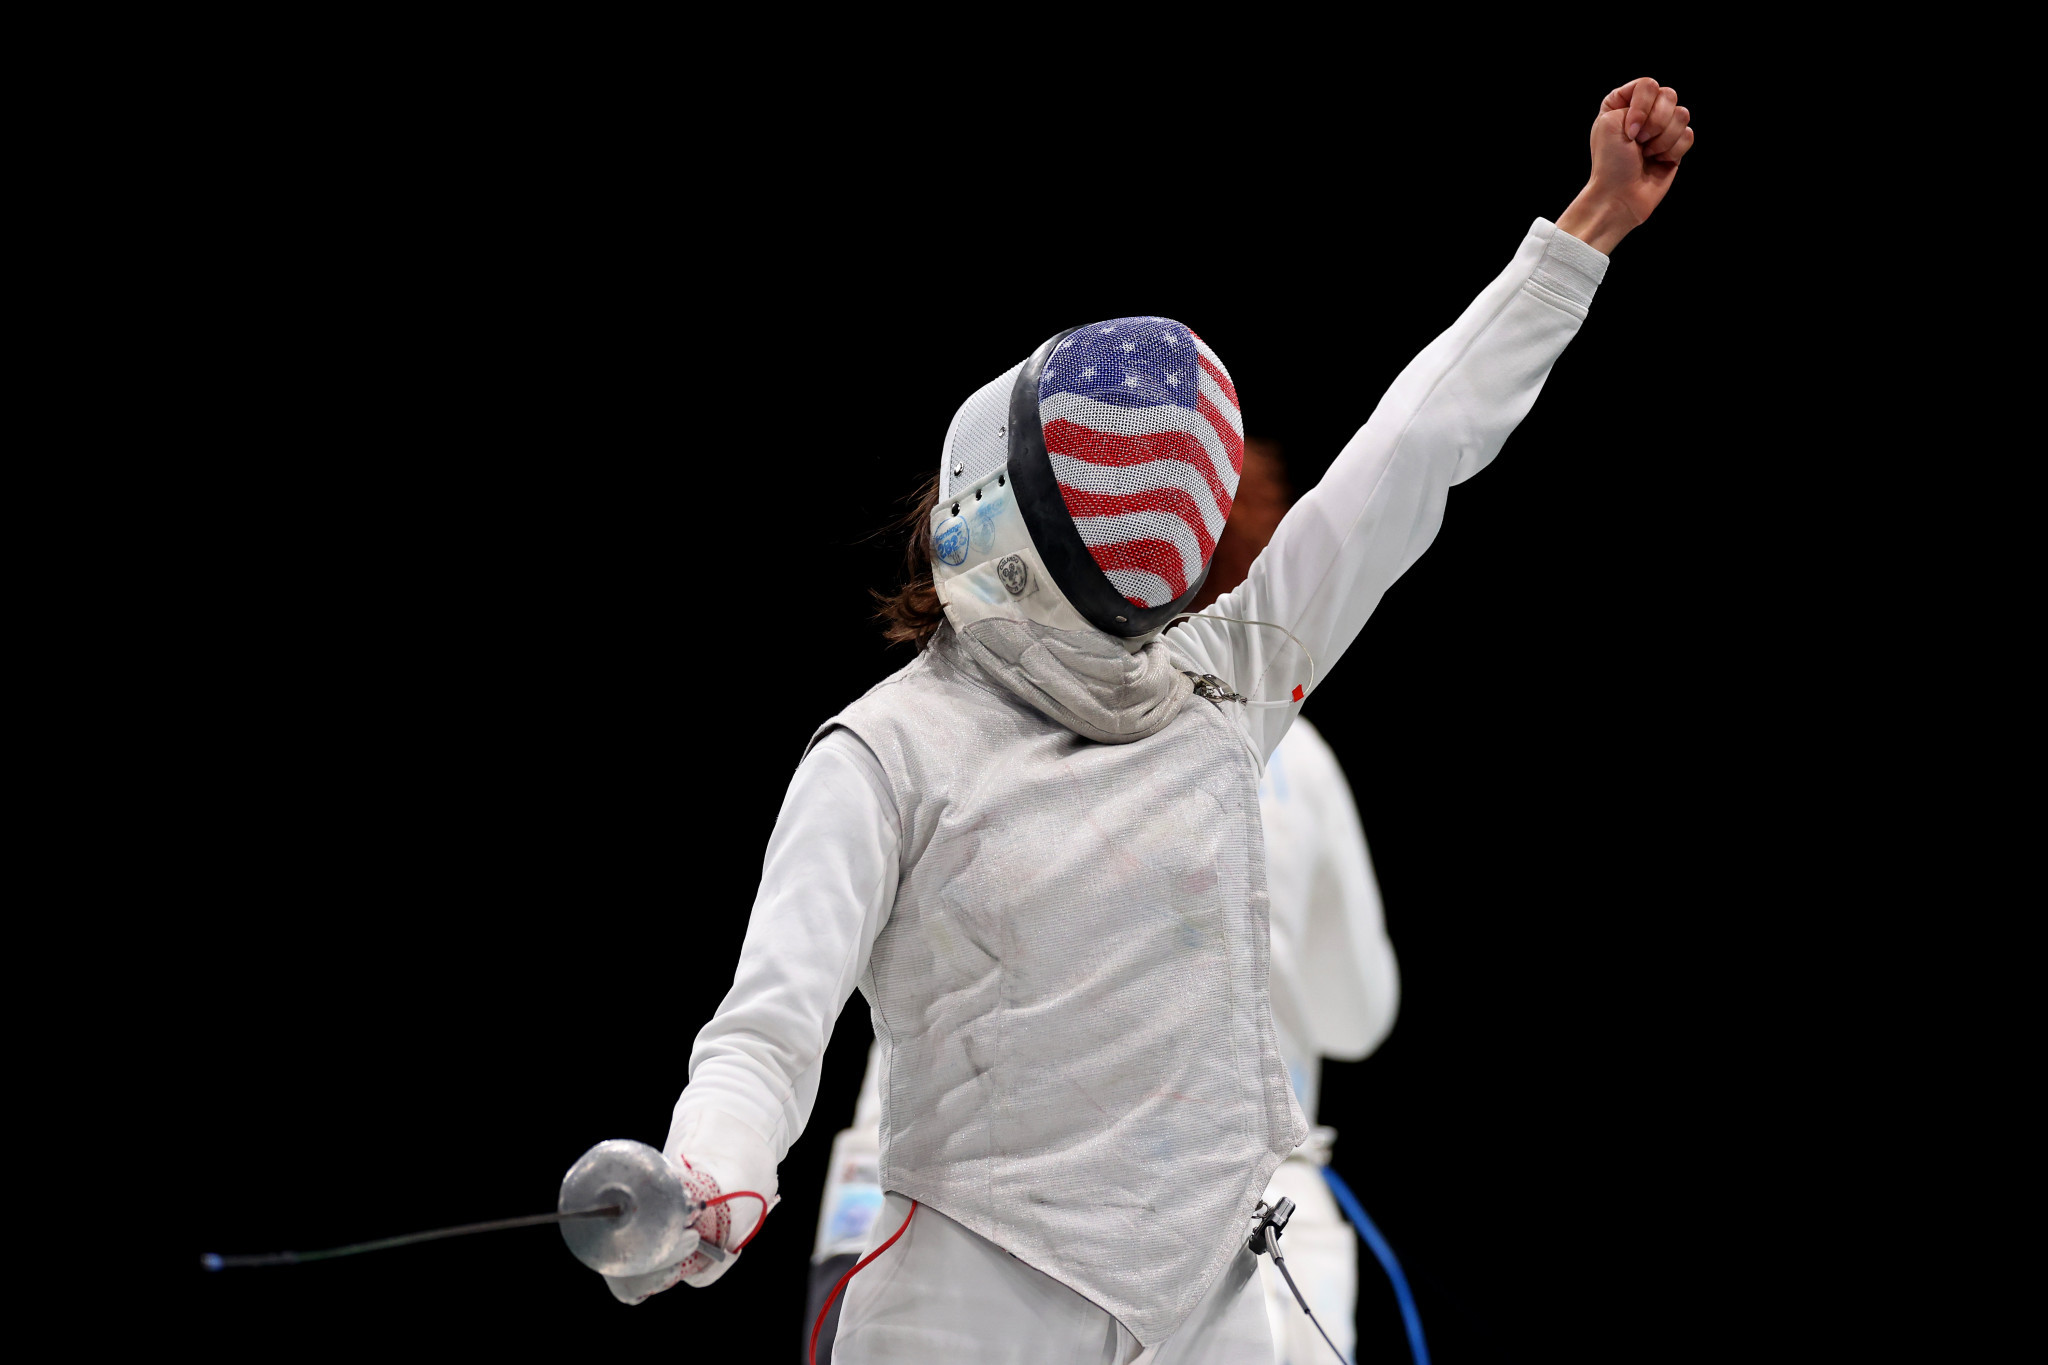 Olympic champion Lee Kiefer of the United States won her fourth consecutive individual women's foil gold at the Pan American Games ©Getty Images